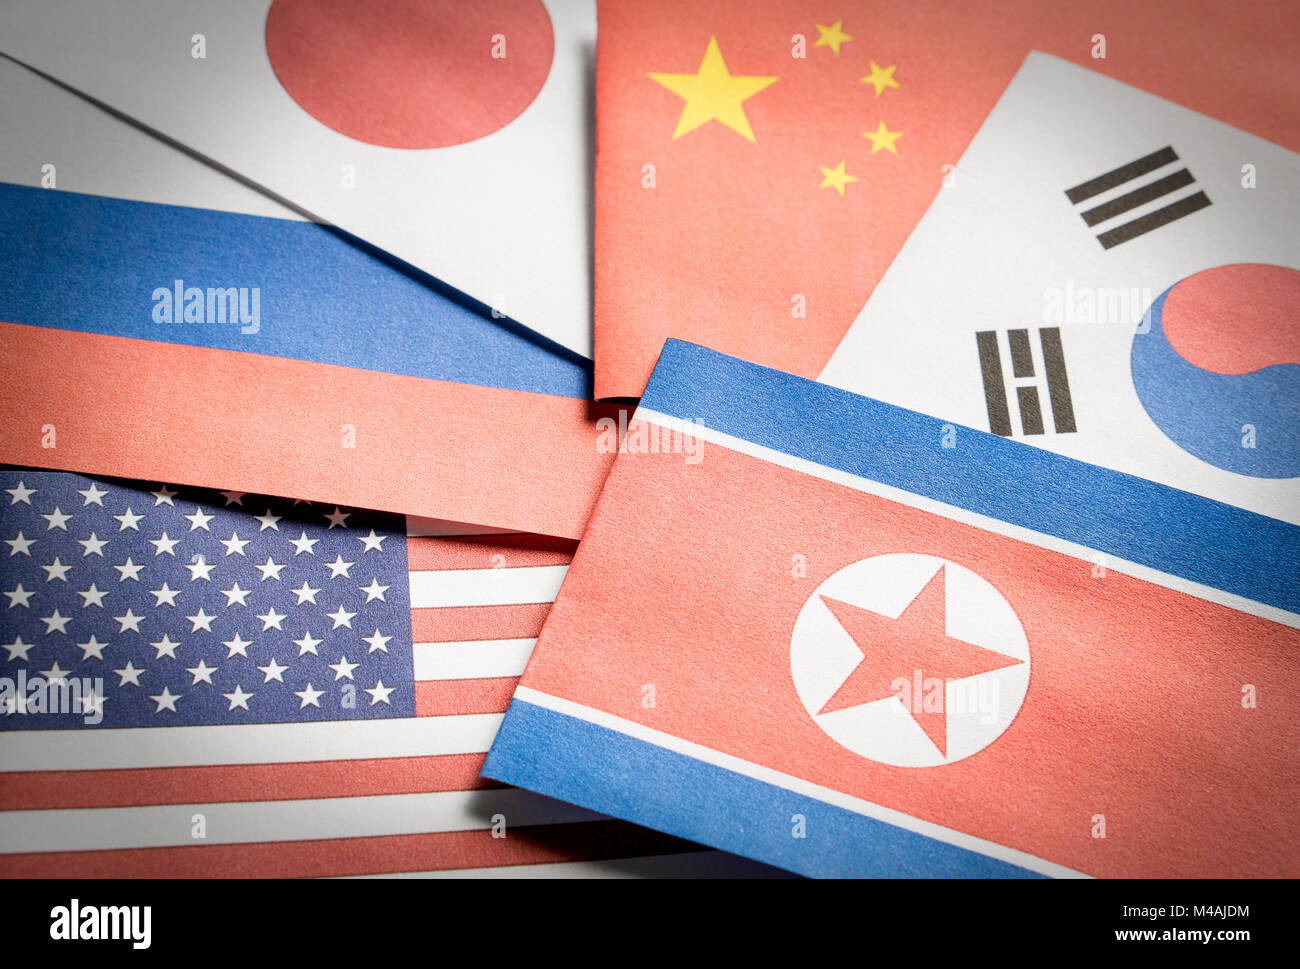 The flag of North Korea, South Korea, United Stated of America (USA), Russia, Japan and China made from paper. Stock Photo